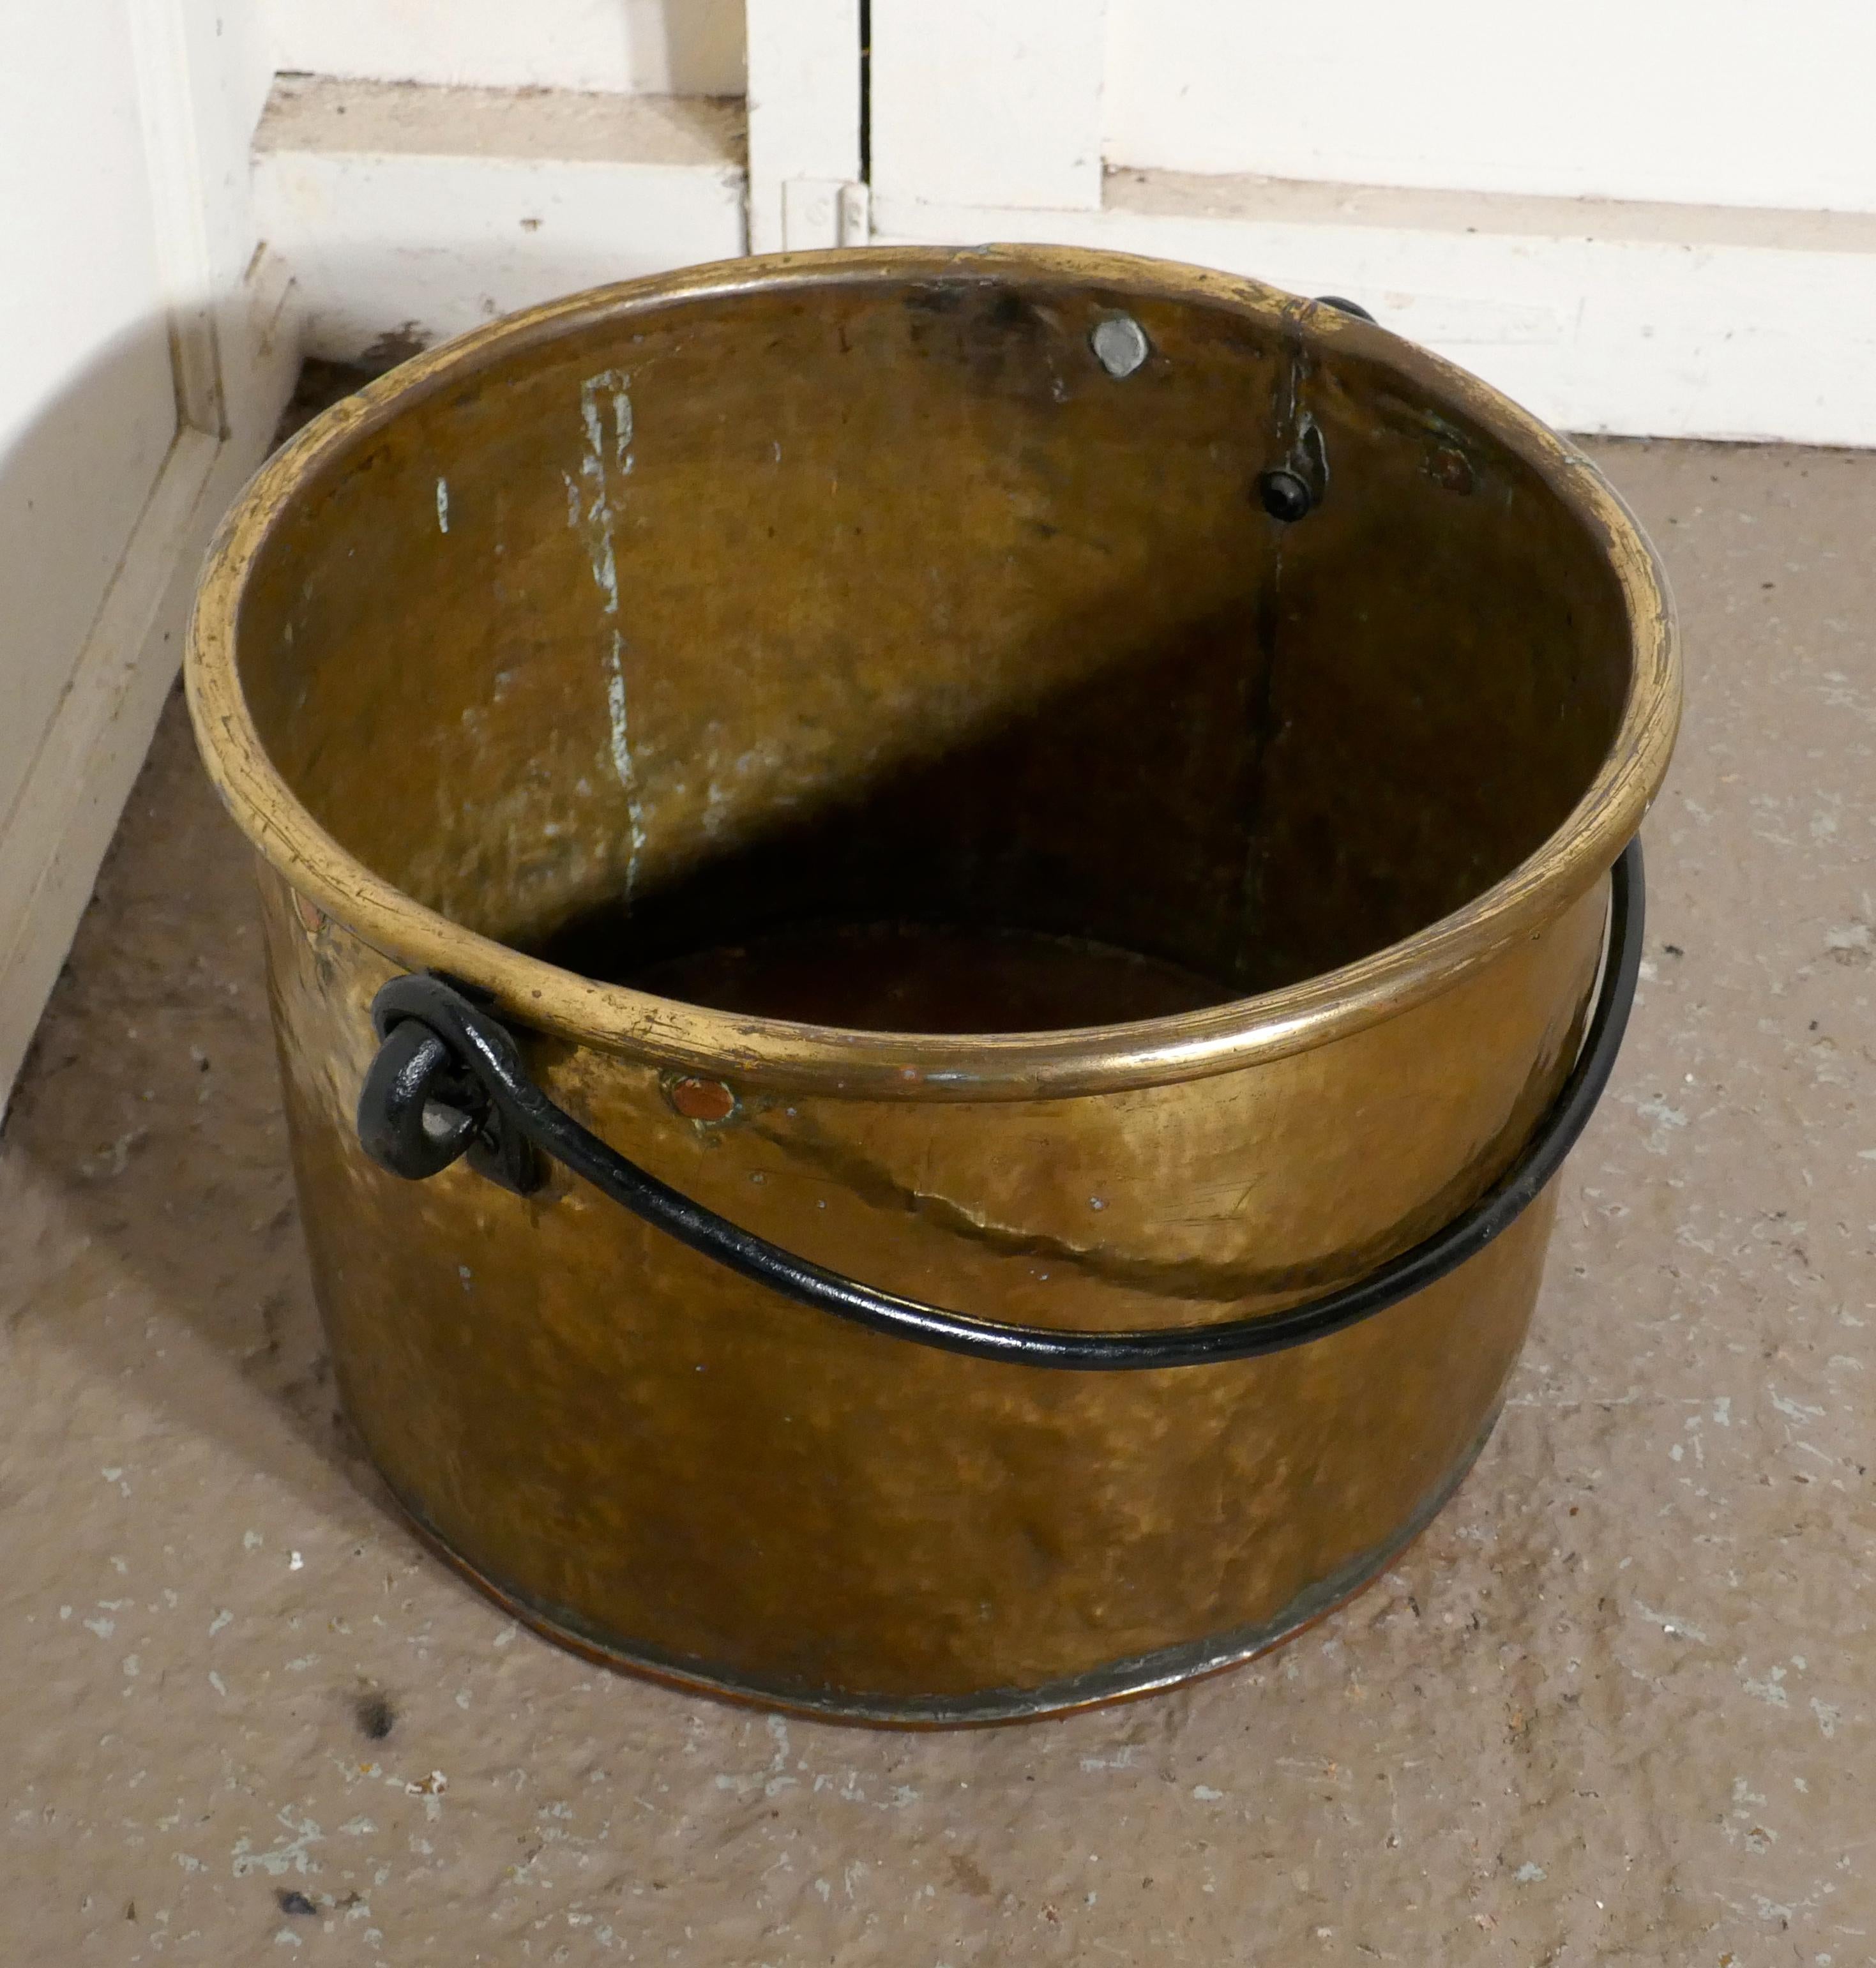 Early 19th century brass cooking pot

This is a lovely cooking 19th century cooking pot, (or coal/log bucket)
The pot has a rolled top and the Iron handle swings through 180 degrees
The bucket has a replaced copper bottom and the handle also has